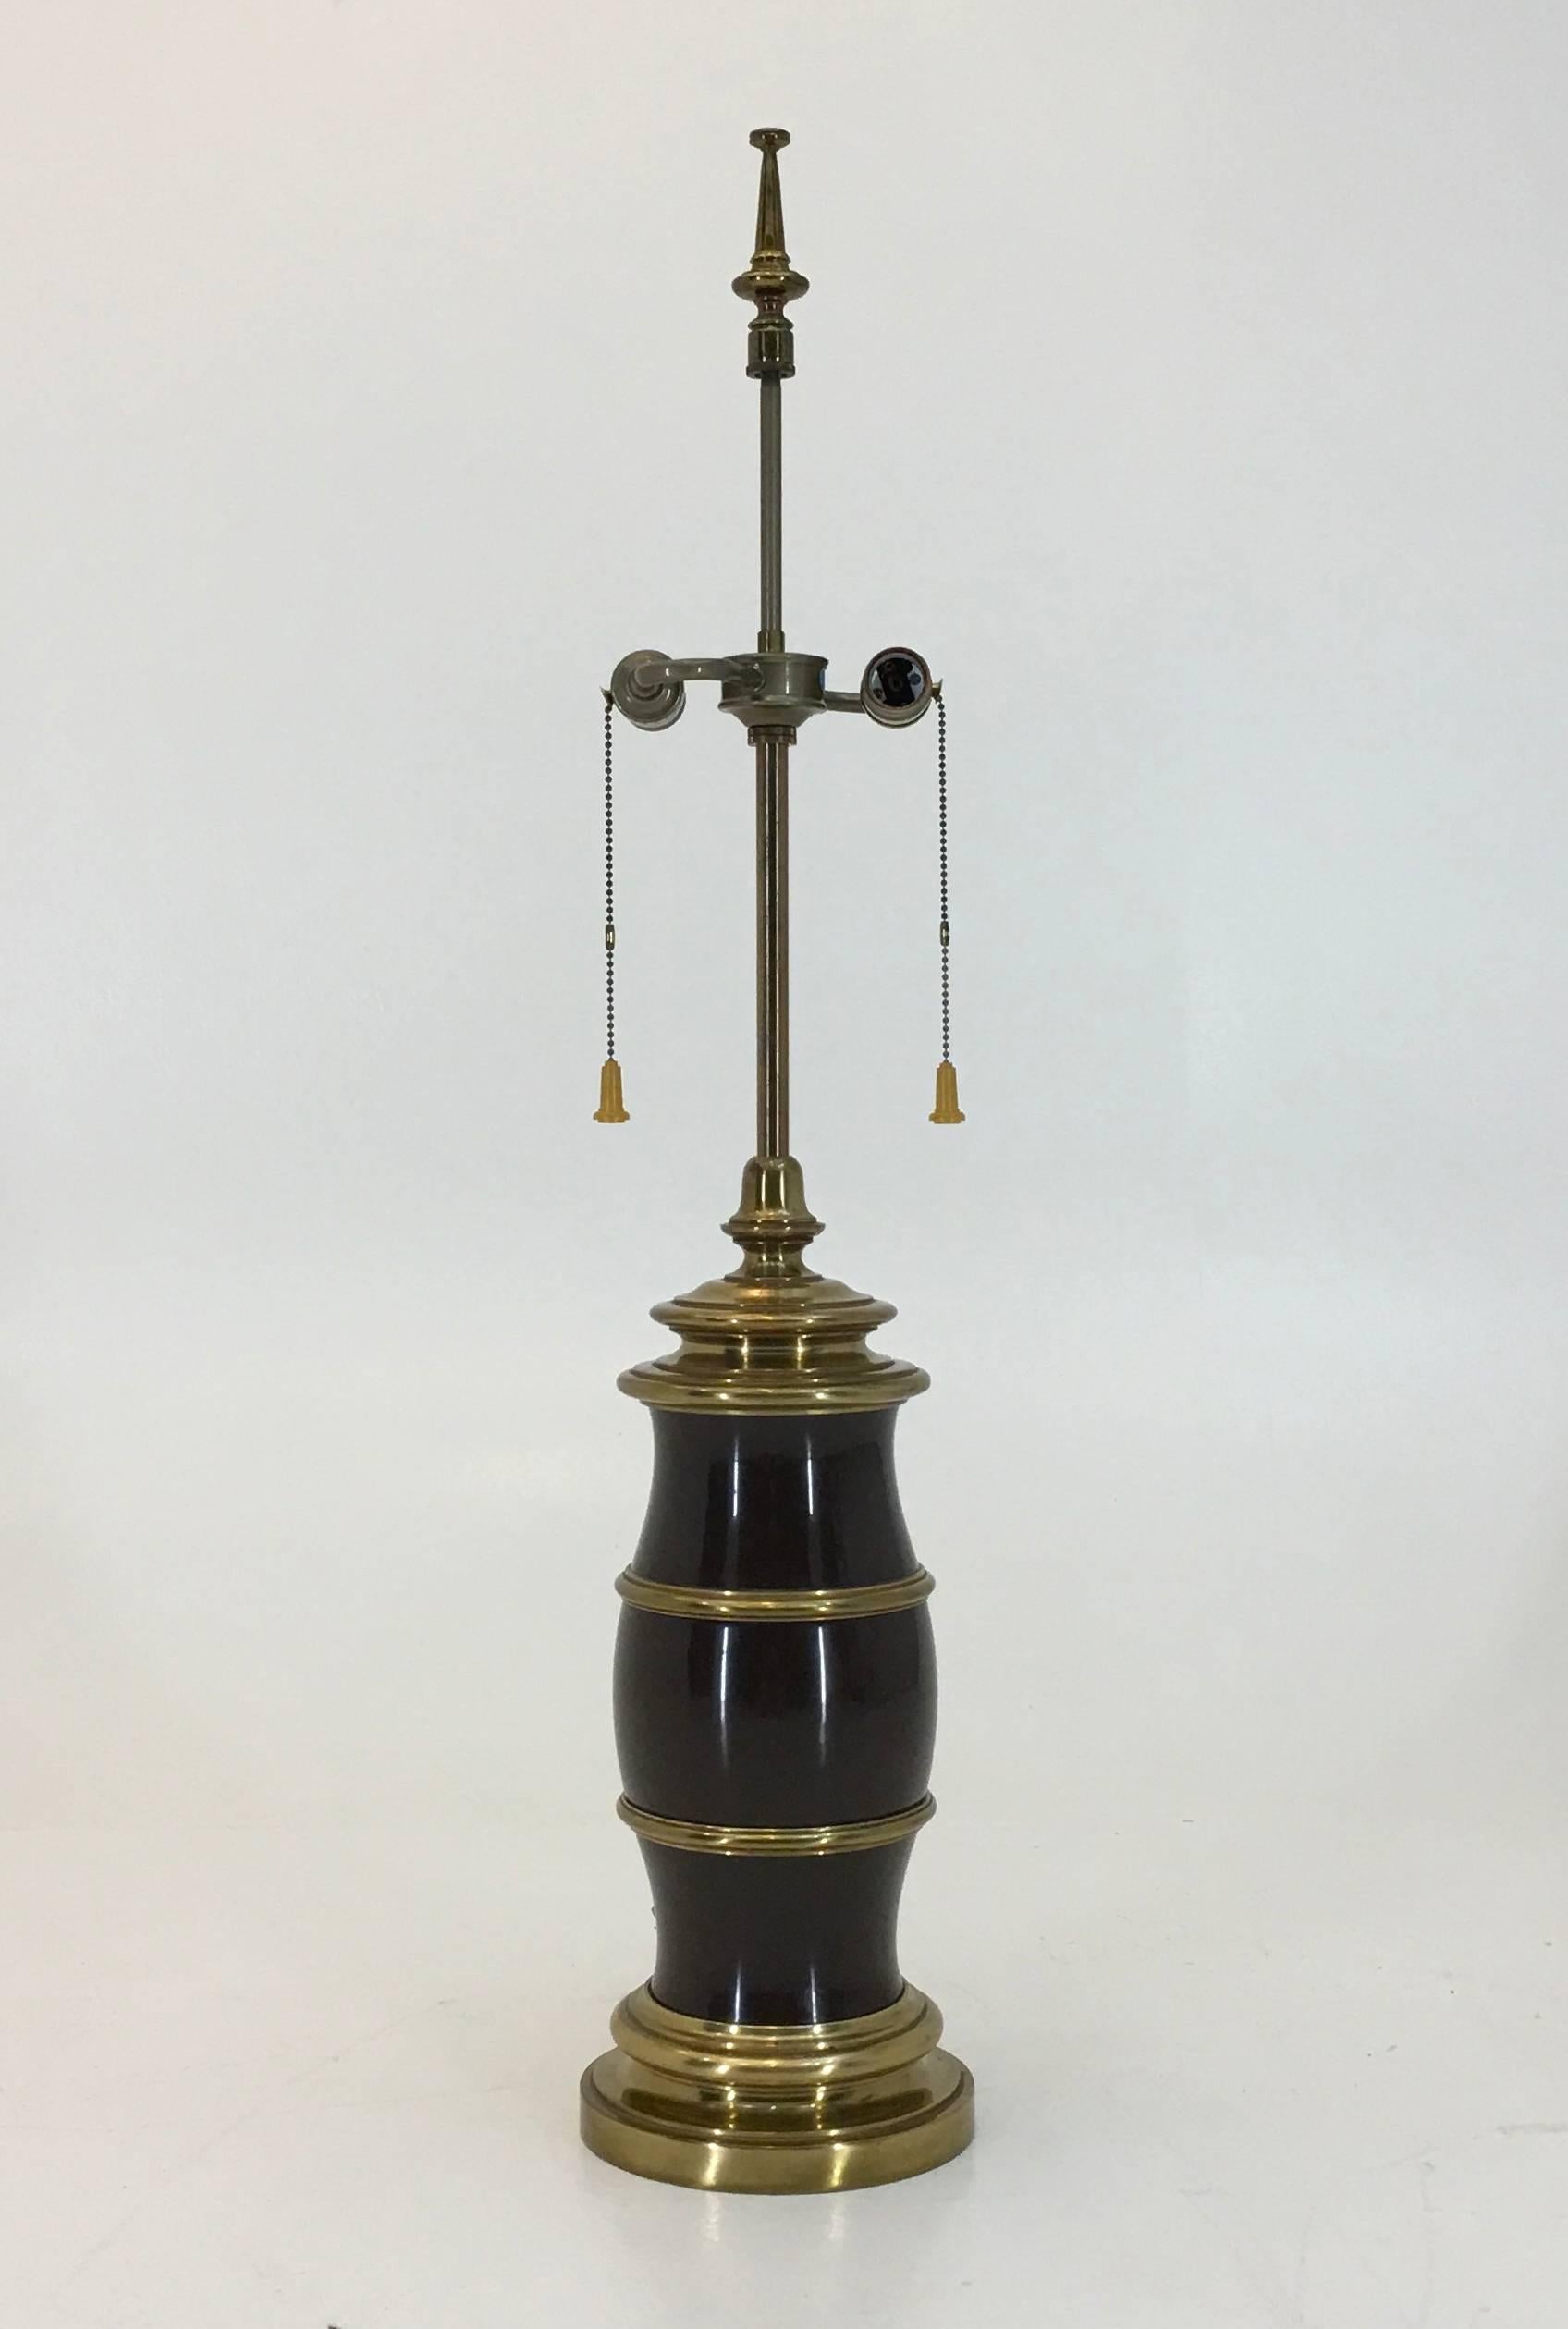 Stiffel, USA, Brass, brown enamel, bakelite, circa 1960, Measure: 38.25 tall x 7.75 inches wide
An exceptional lamp by Stiffel lighting. Even by Stiffel standards this is a very heavy lamp with a brown enamel over three sections of the brass.